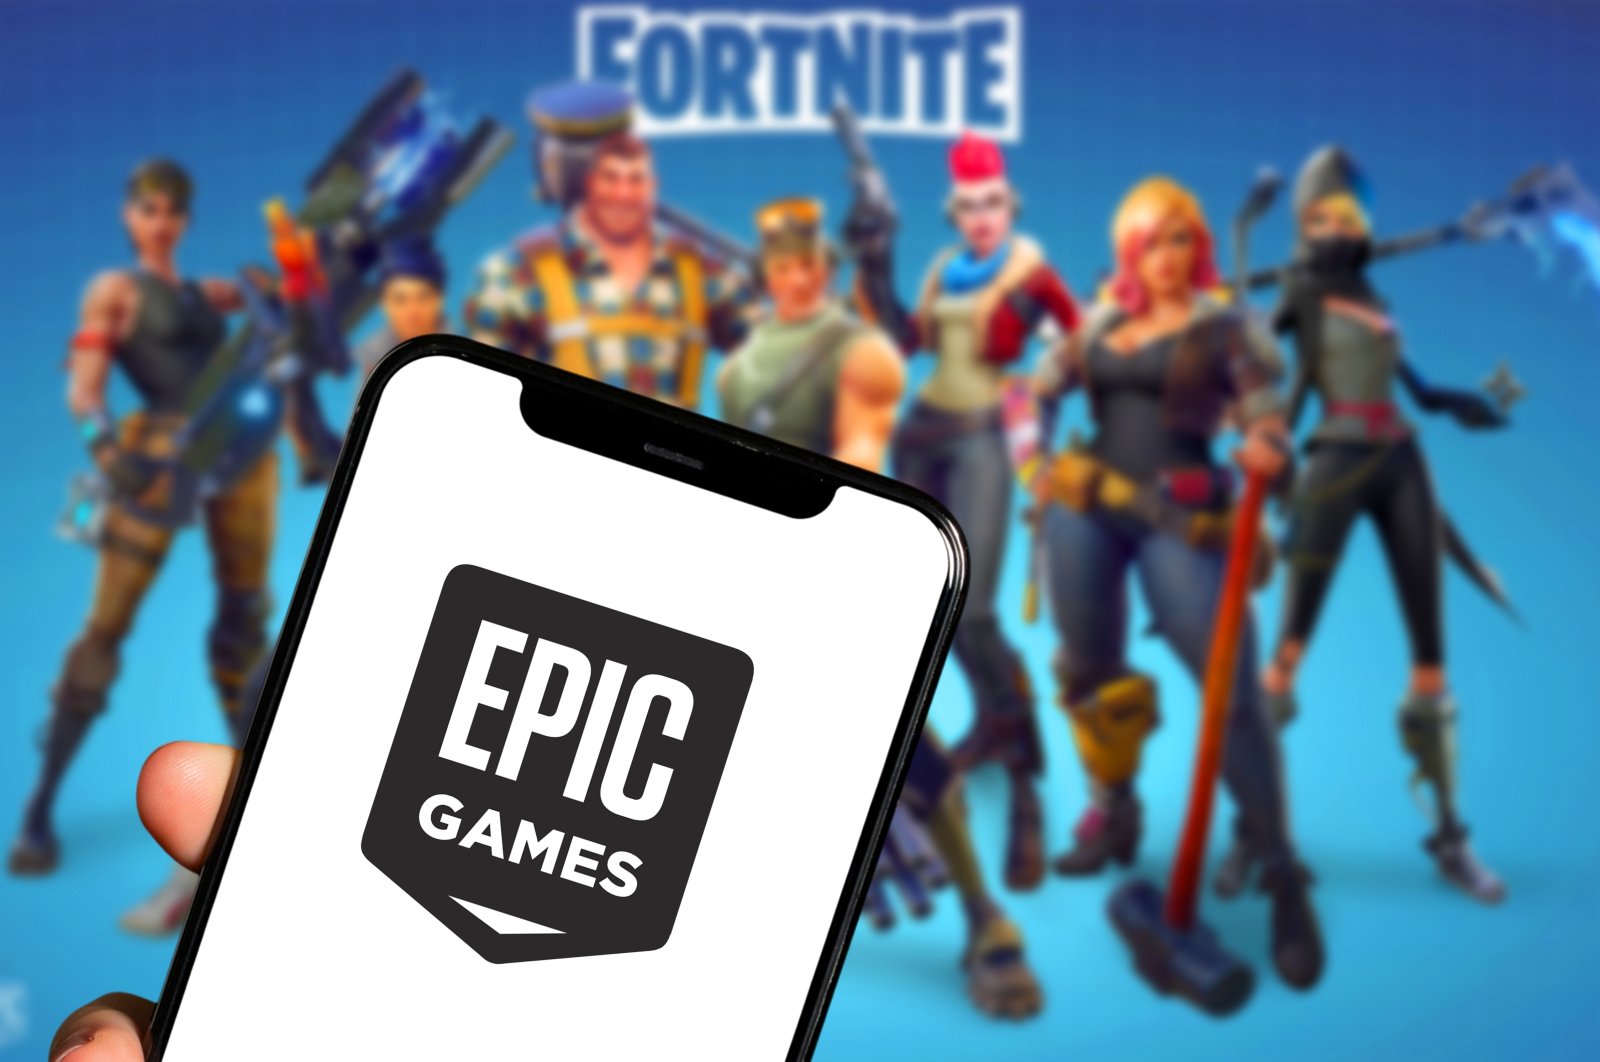 A smartphone with the logo of Epic Games is seen in front of characters from the video game Fortnite, New York, U.S., Jan. 29, 2022. (Shutterstock Photo)